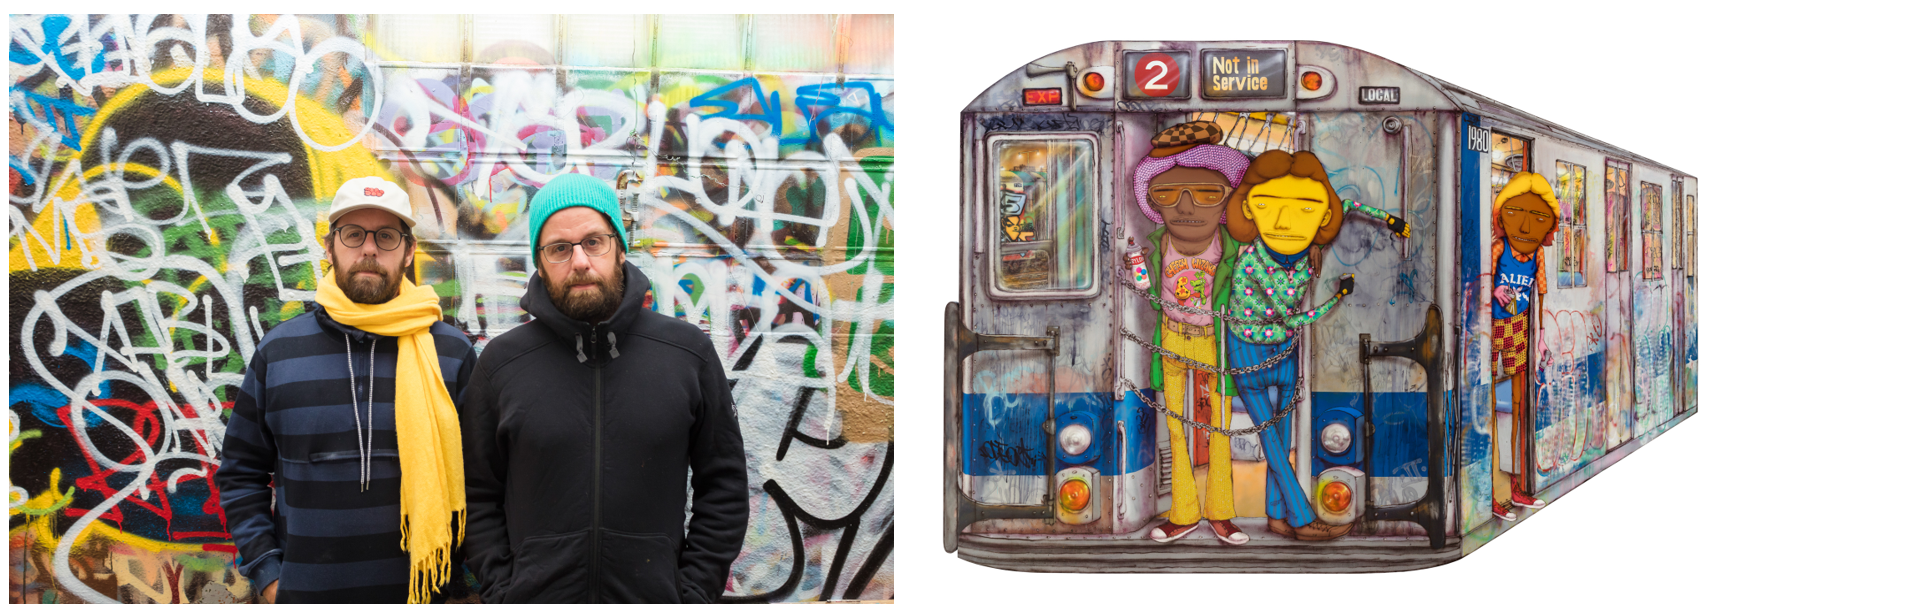 a composite image of two Brazilian artists posing in front of a wall covered in graffiti and a painting of a subway car covered in graffiti with three figures on the outside of the car.